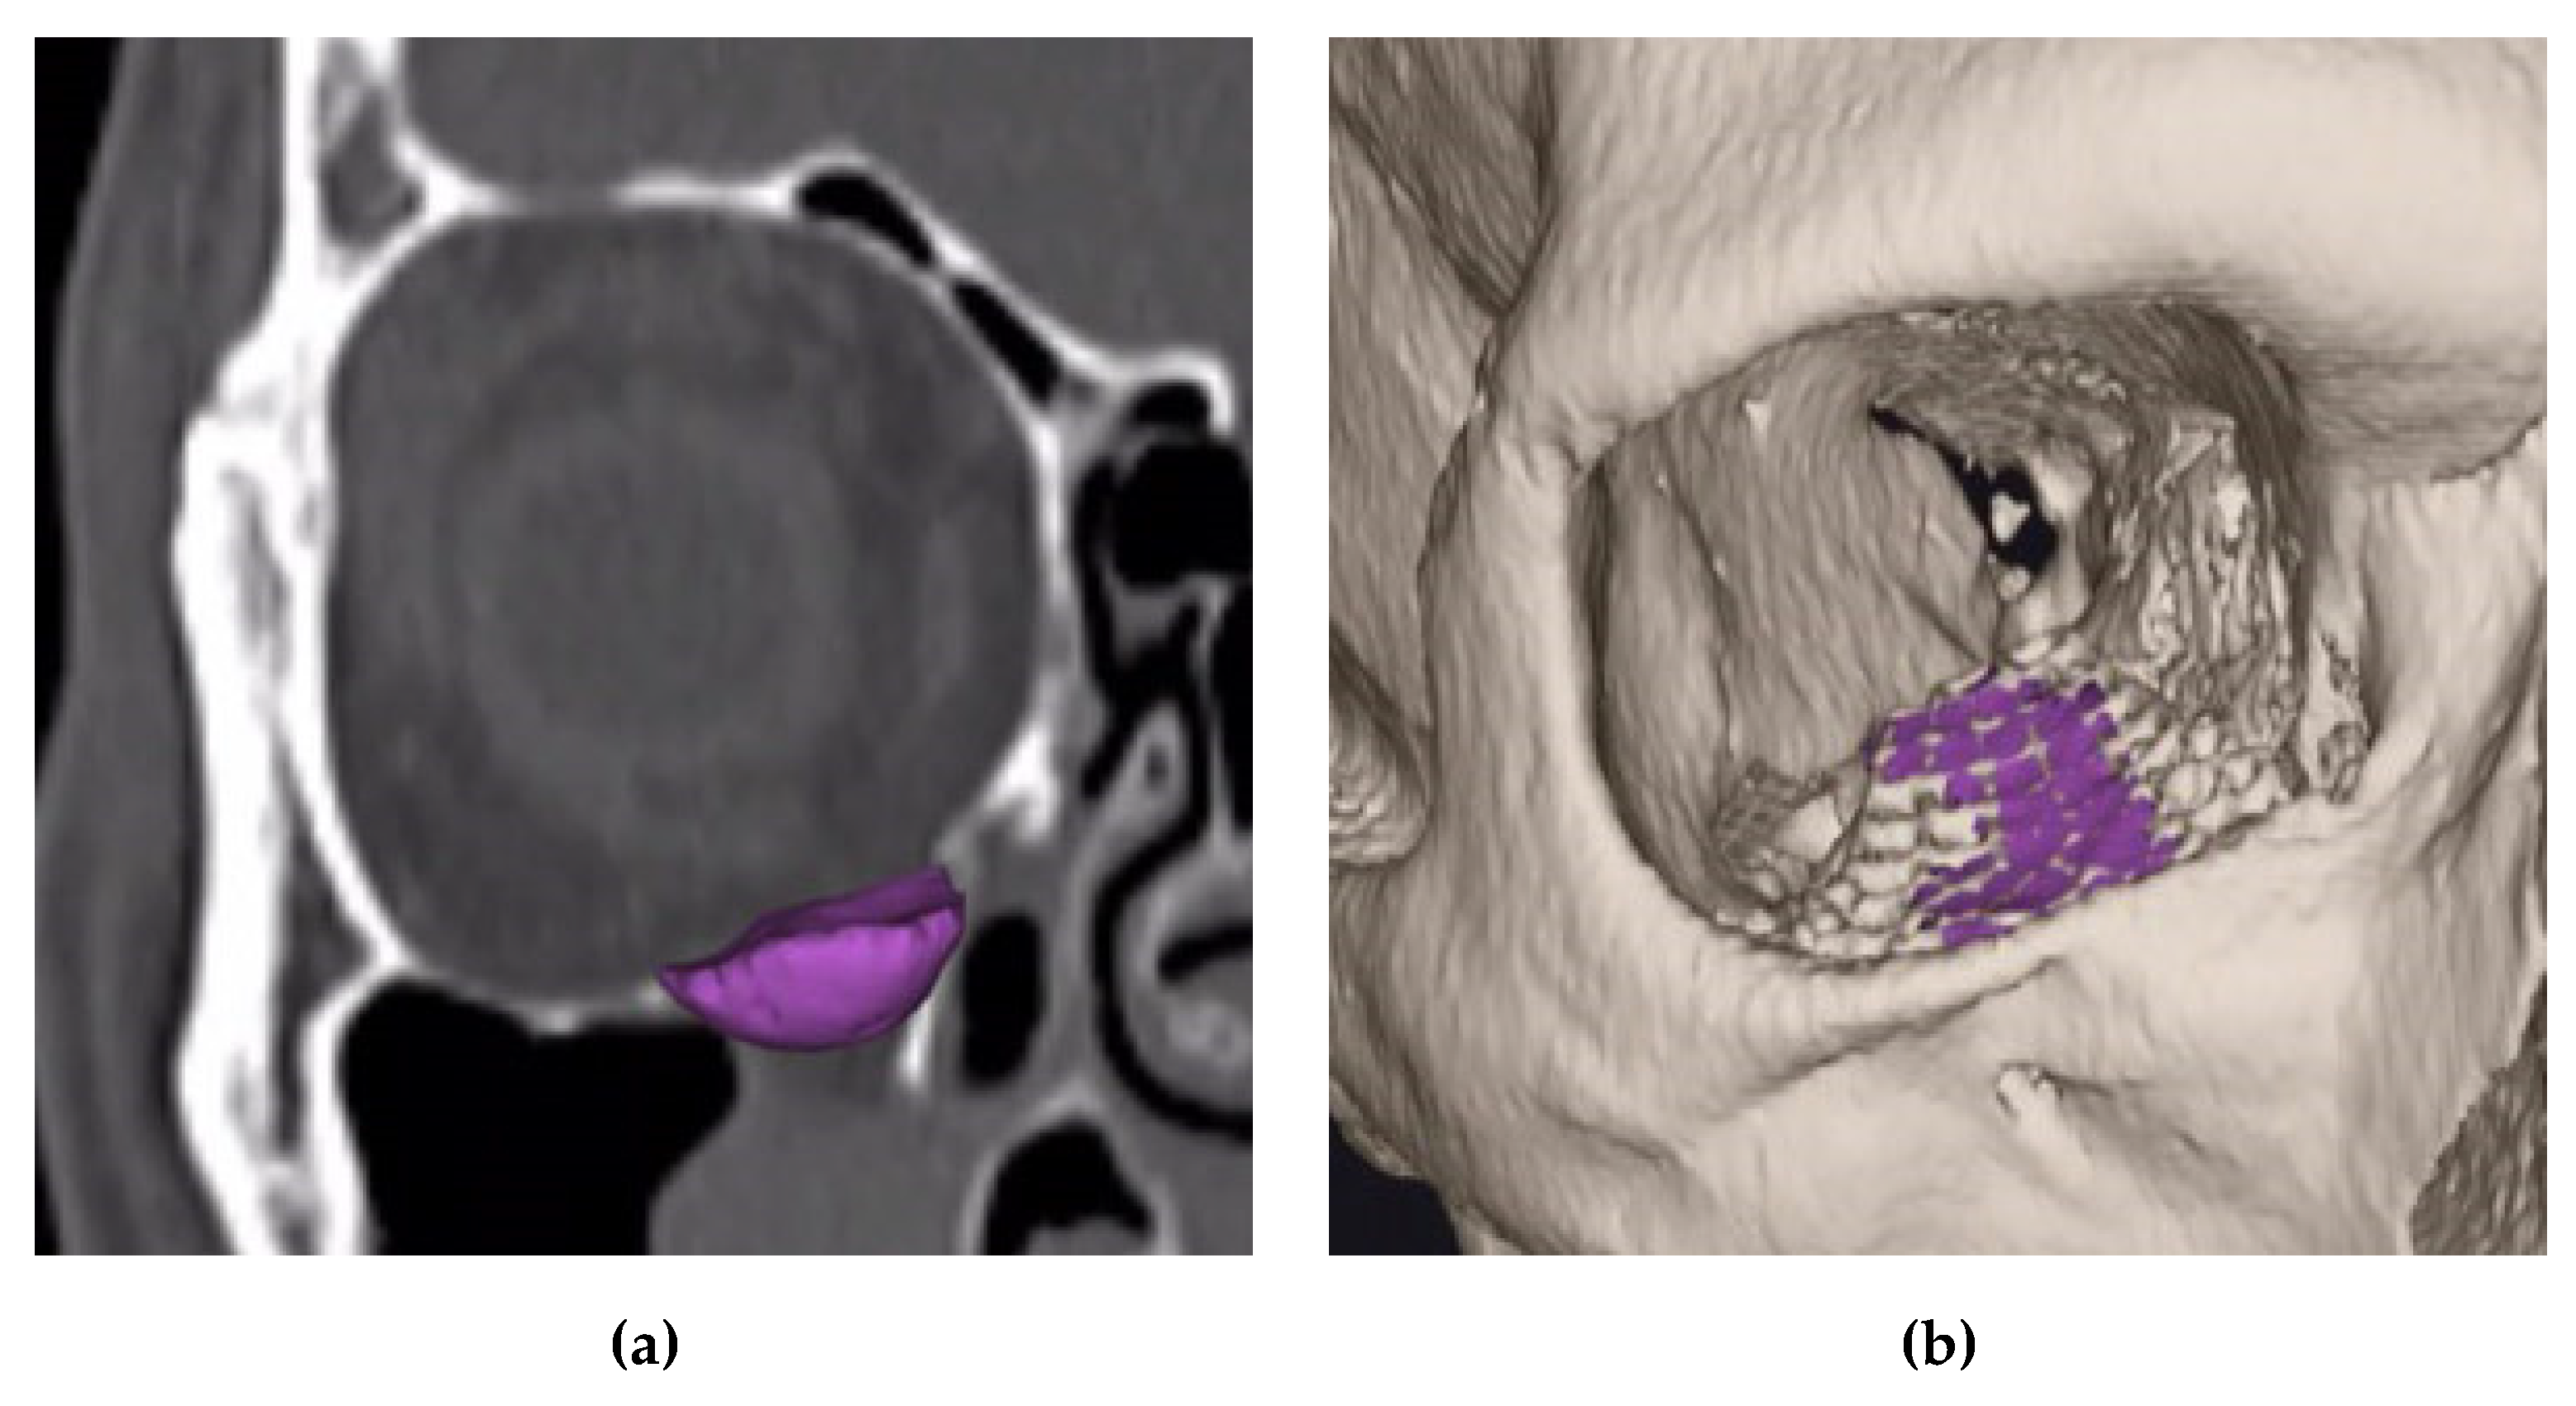 Jcm Free Full Text Three Dimensional Analysis Of Isolated Orbital Floor Fractures Pre And Post Reconstruction With Standard Titanium Meshes Hybrid Patient Specific Implants